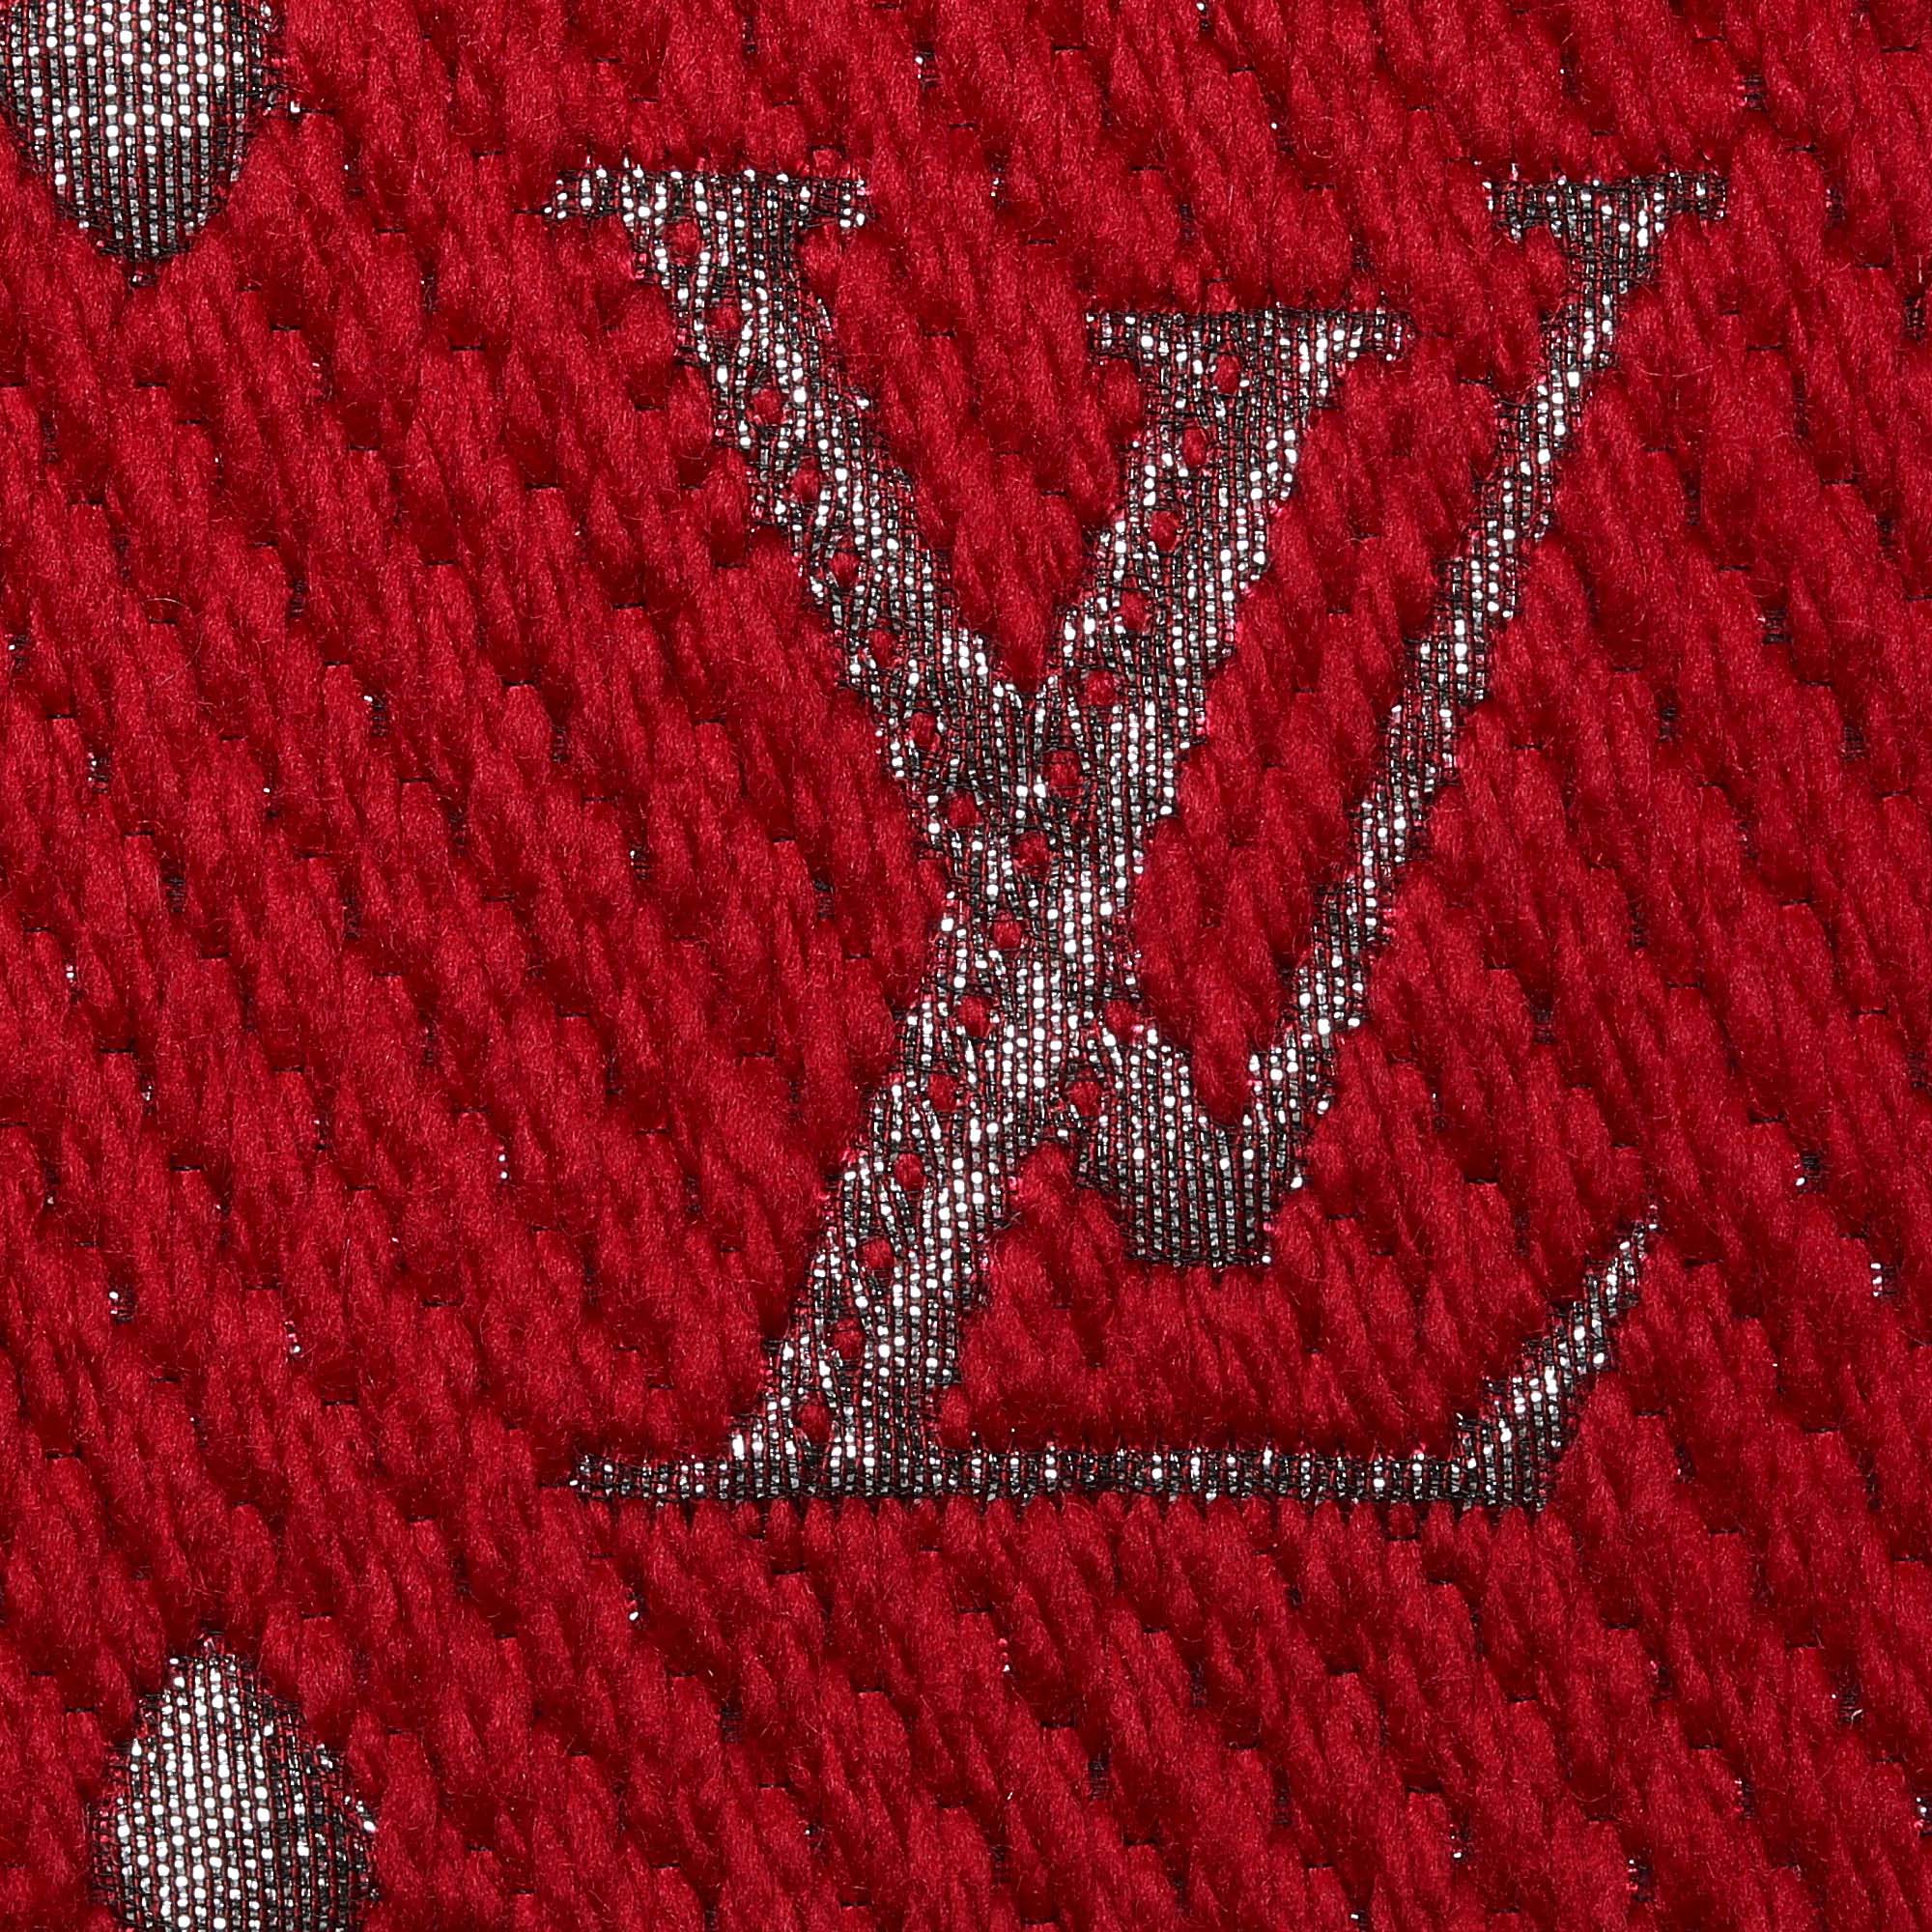 Louis Vuitton LV Logo Multicolor Silk/Wool Blanket Scarf, Blue/Red M78715, NEW